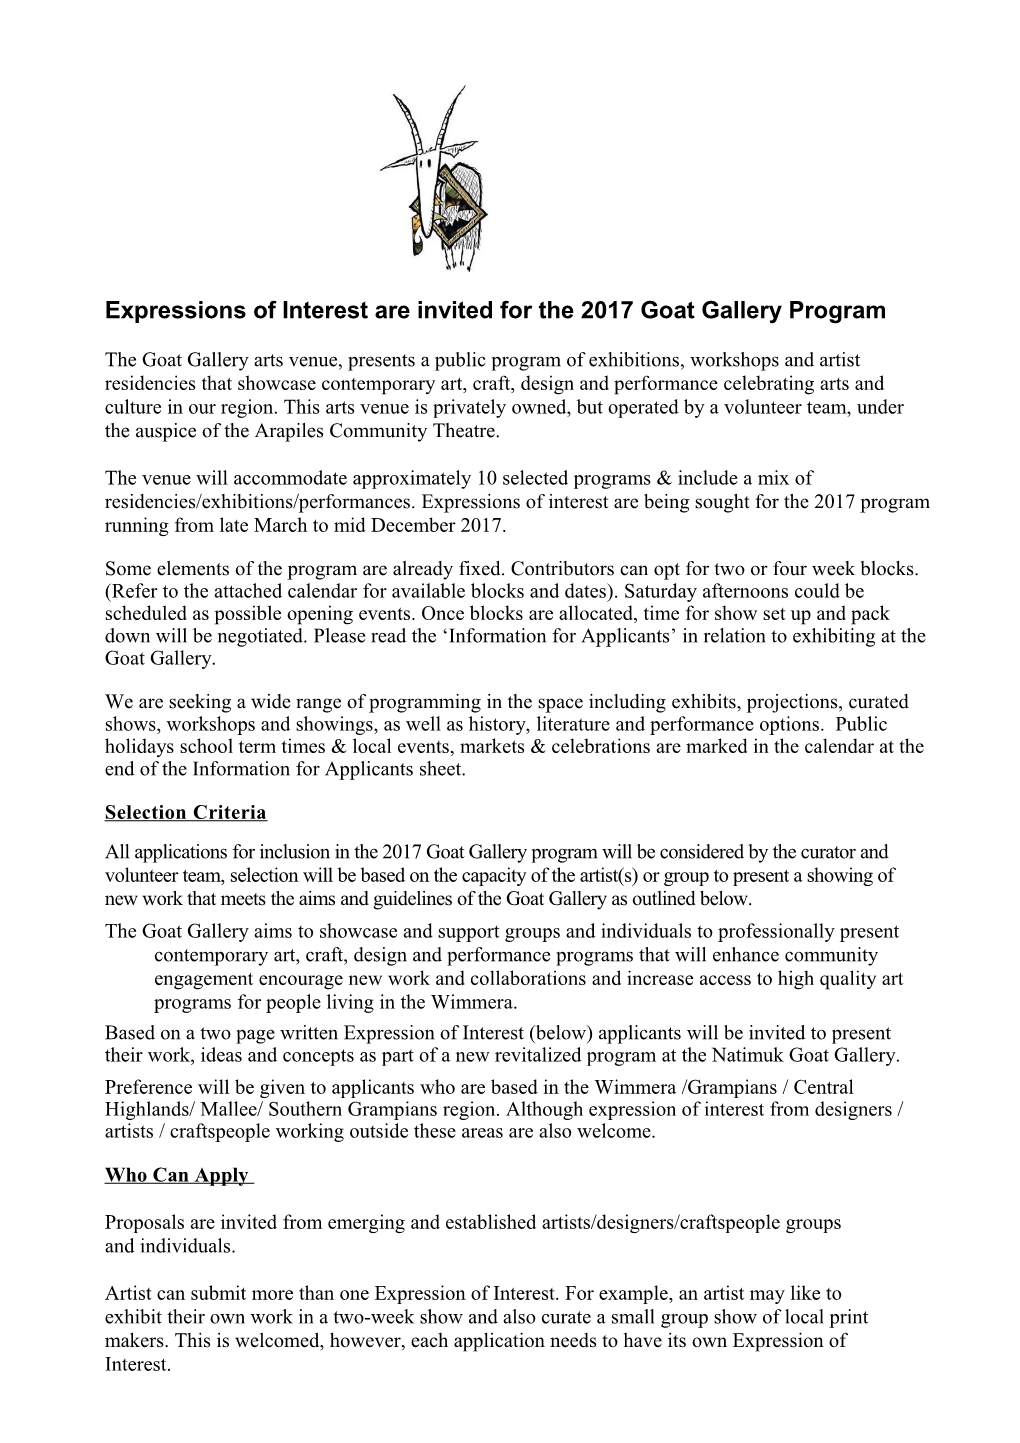 Expressions of Interest Are Invited for the 2017 Goat Gallery Program